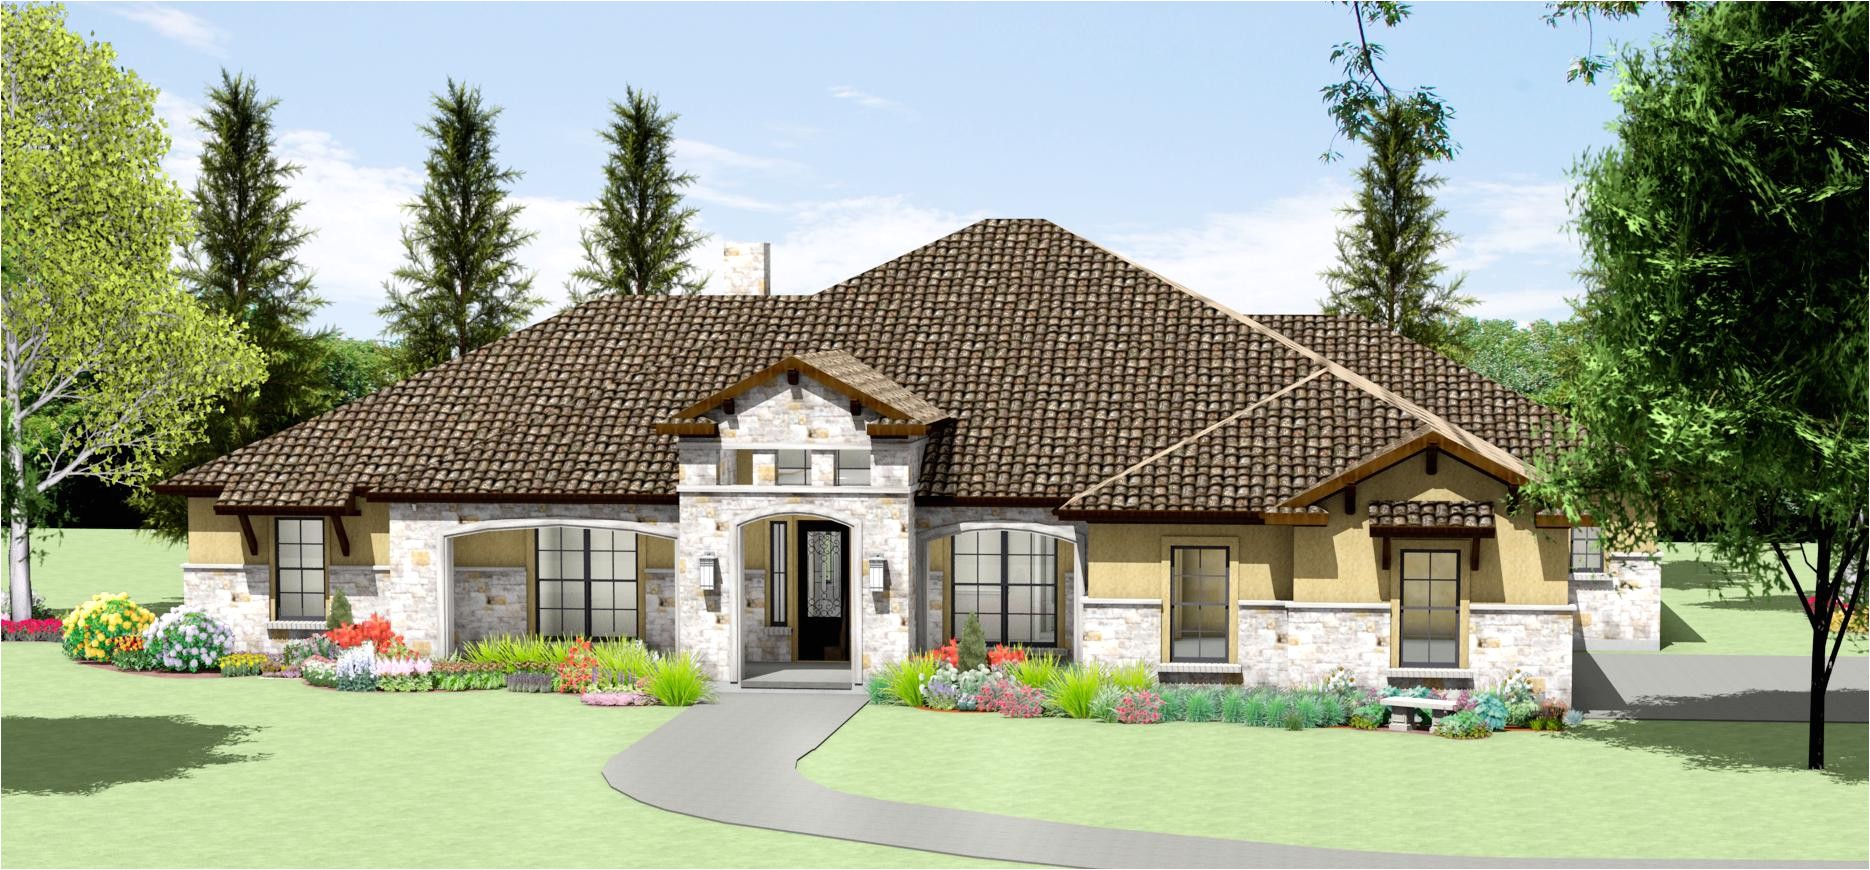 texas hill country ranch style home plans